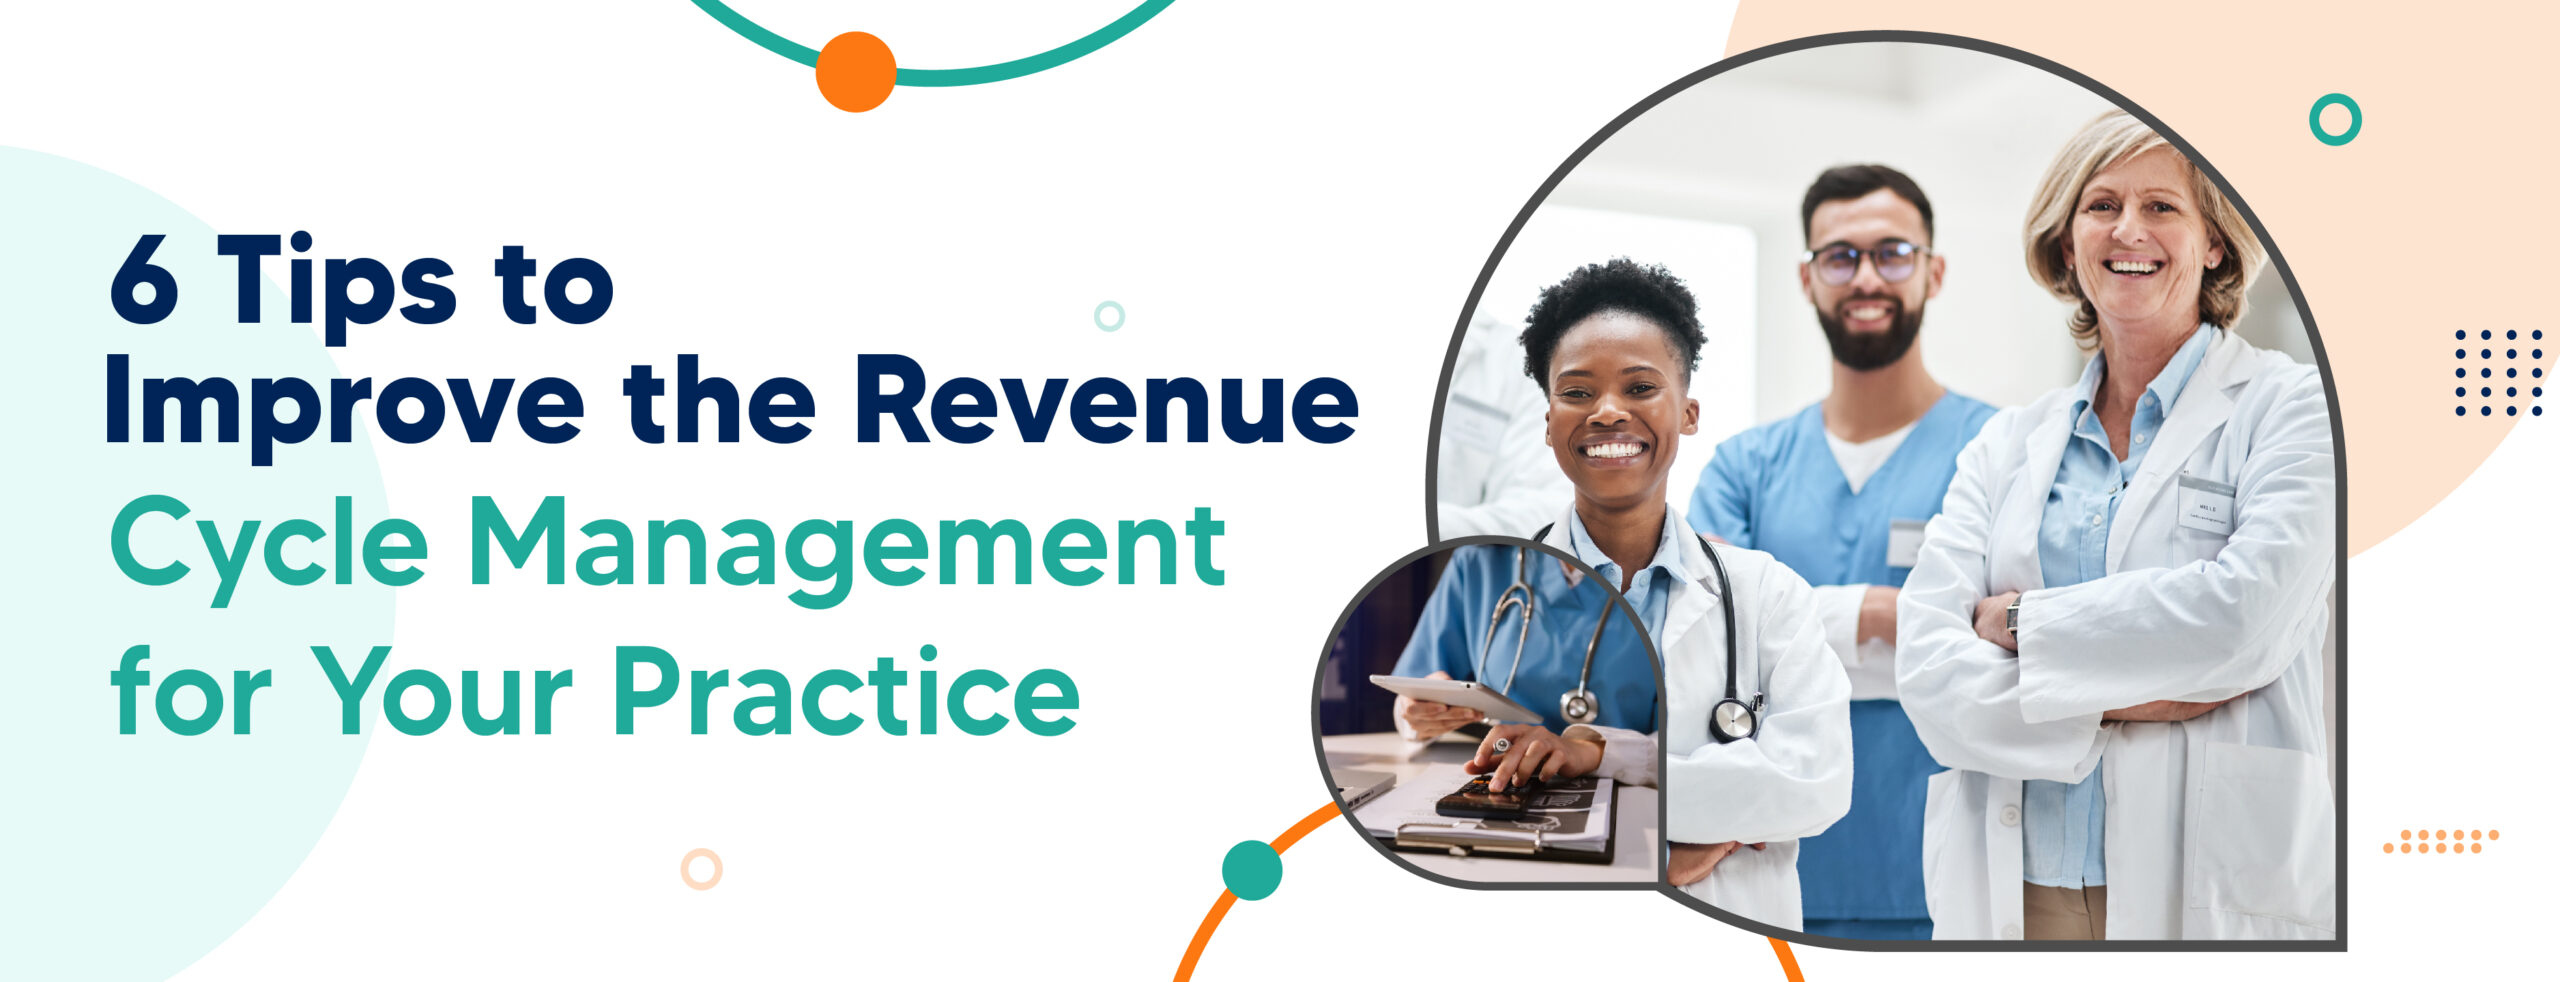 Tips_to_Improve_the_Revenue_Cycle_Management_for_Your_Practice-01-scaled